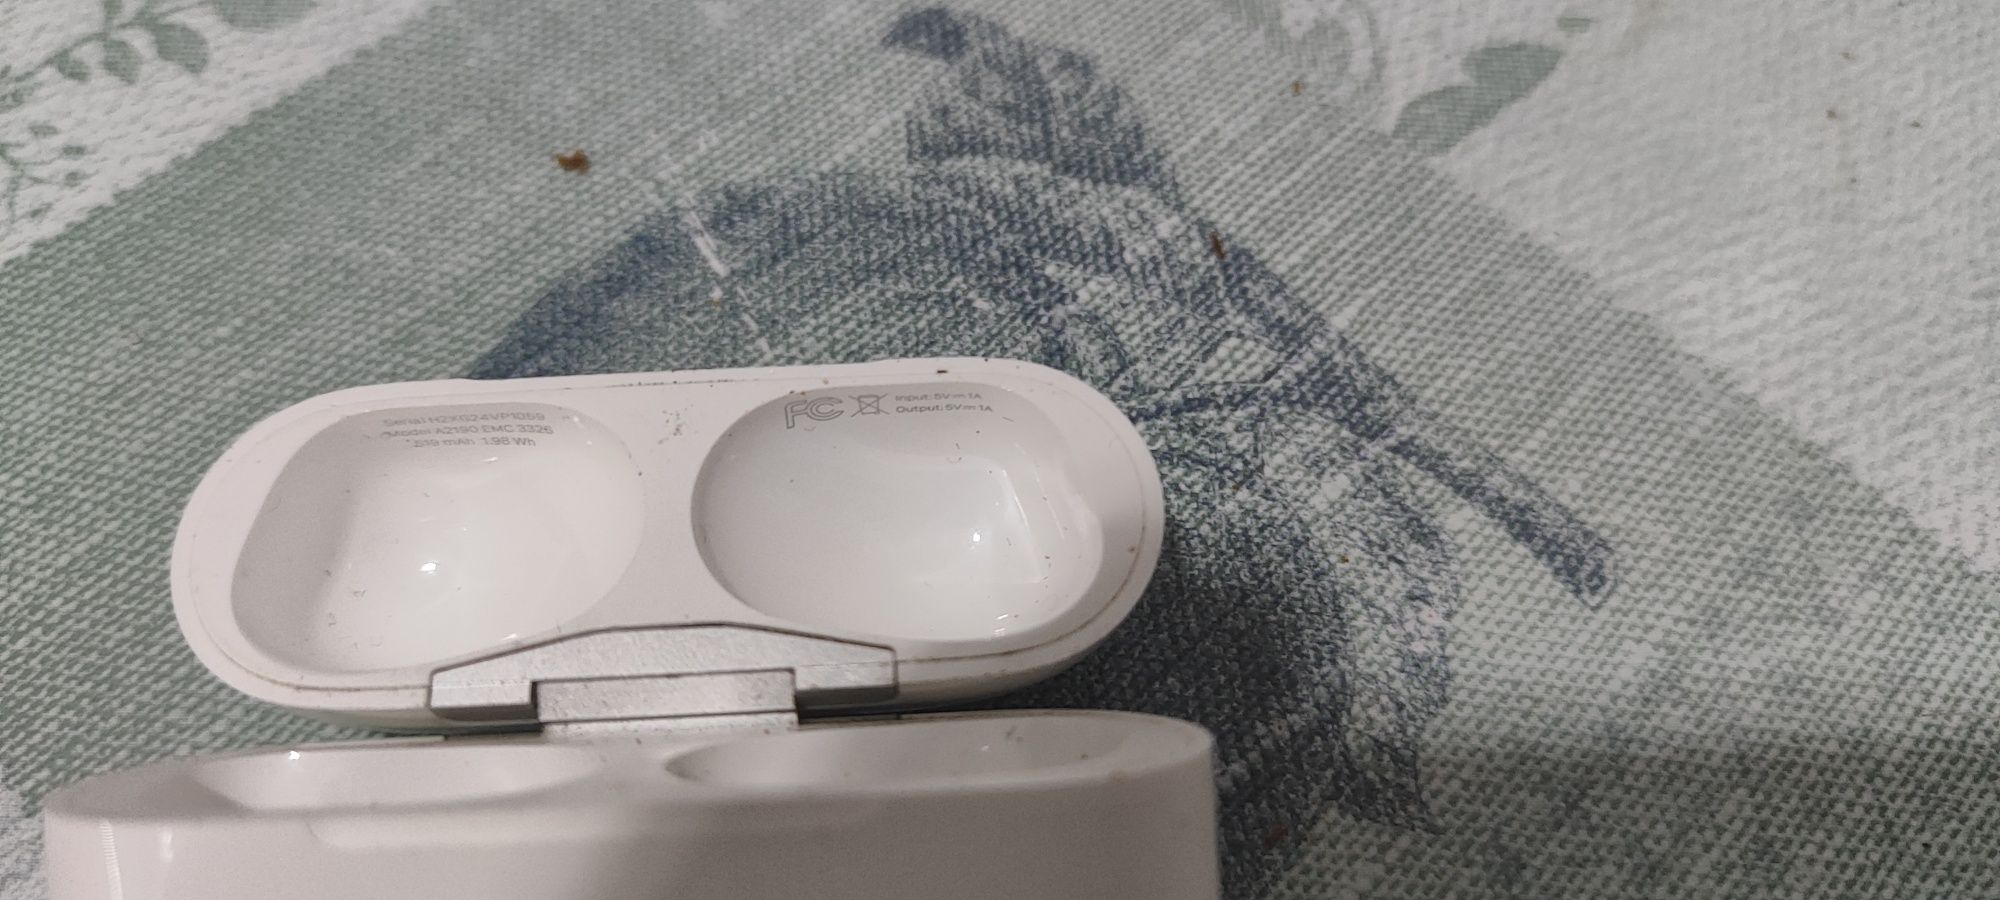 AirPods Pro Charging Case: A2190